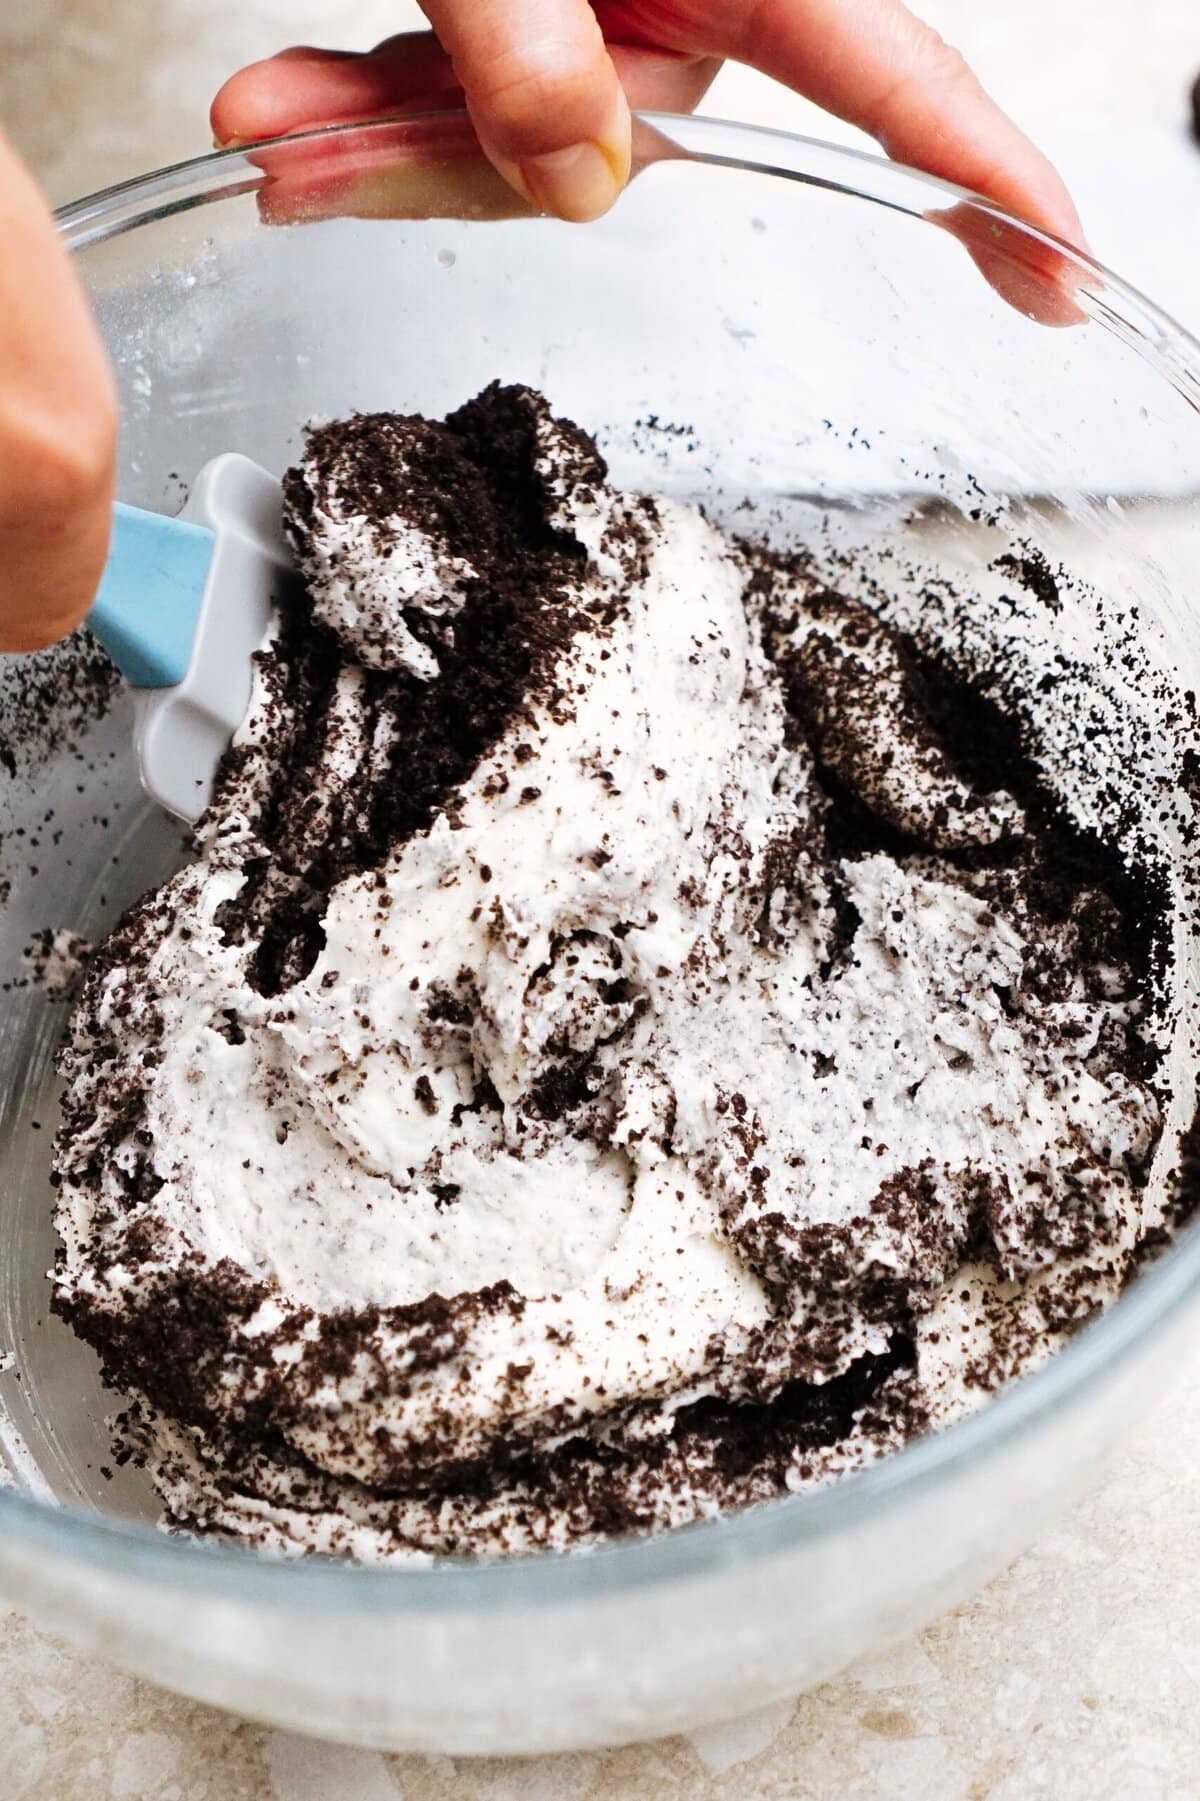 A glass bowl filled with a mixture of crumbled cookies and white creamy substance. A hand is using a spatula to mix the contents.